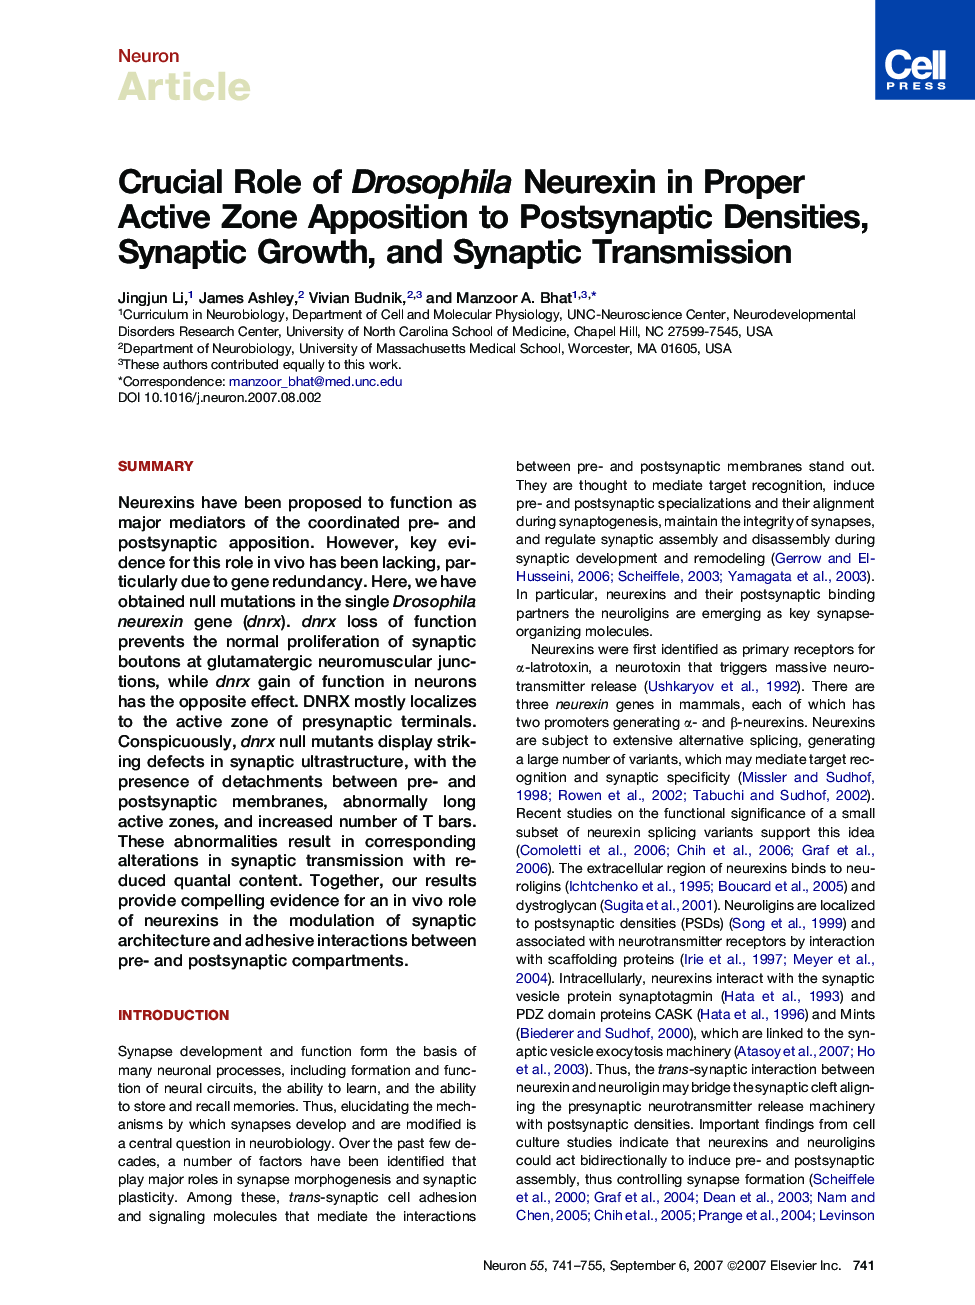 Crucial Role of Drosophila Neurexin in Proper Active Zone Apposition to Postsynaptic Densities, Synaptic Growth, and Synaptic Transmission